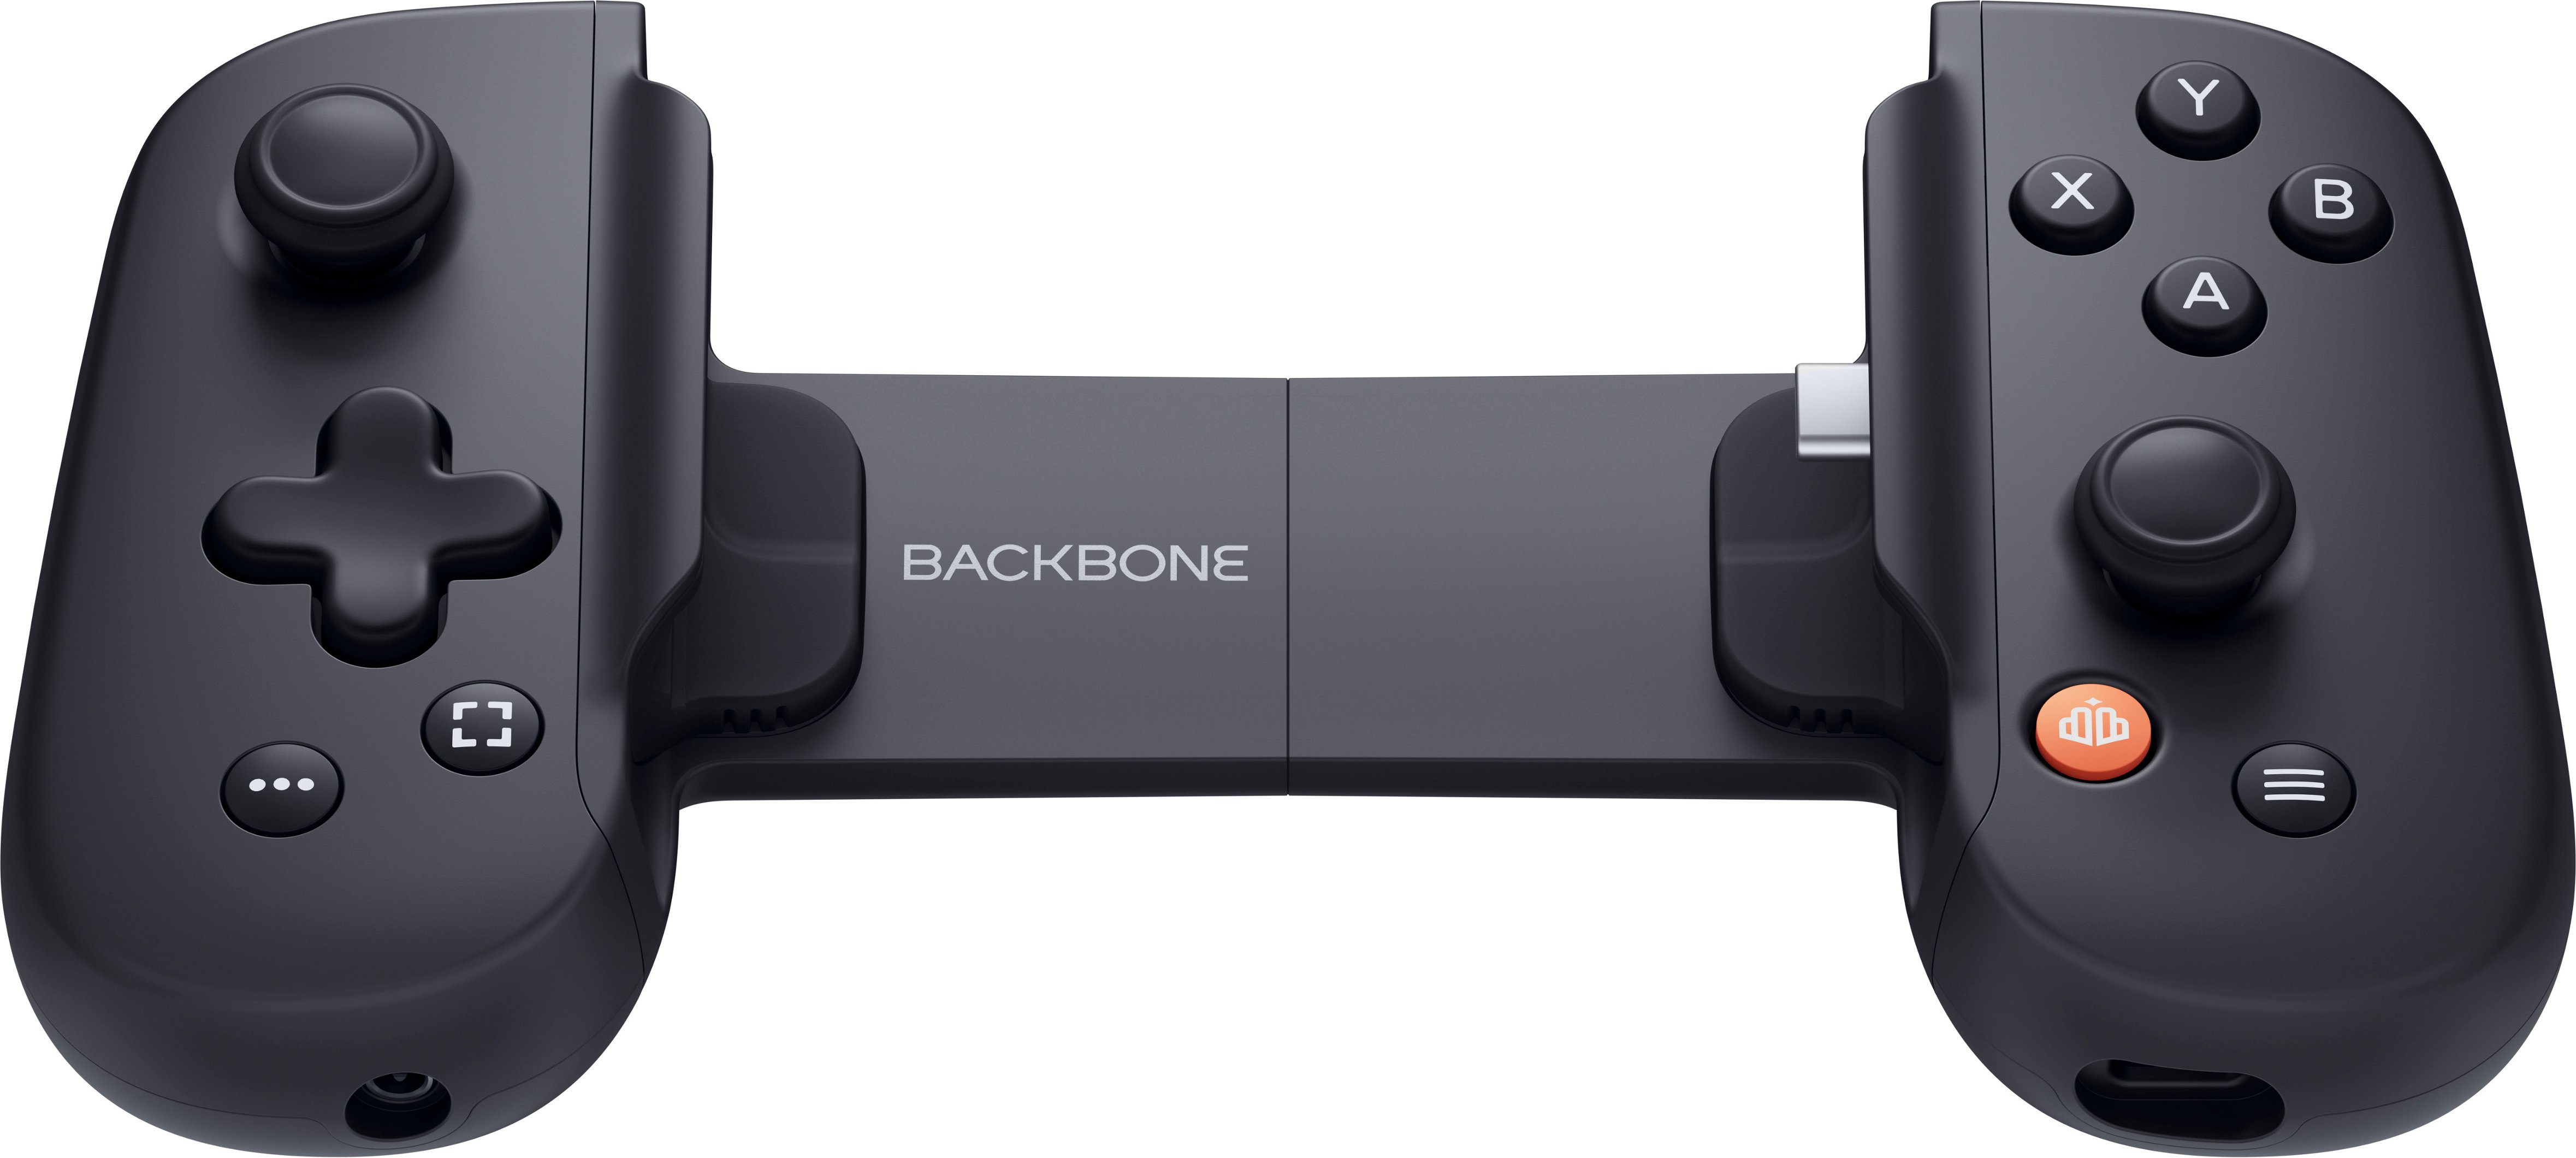 Backbone One Controller for Android for sale online